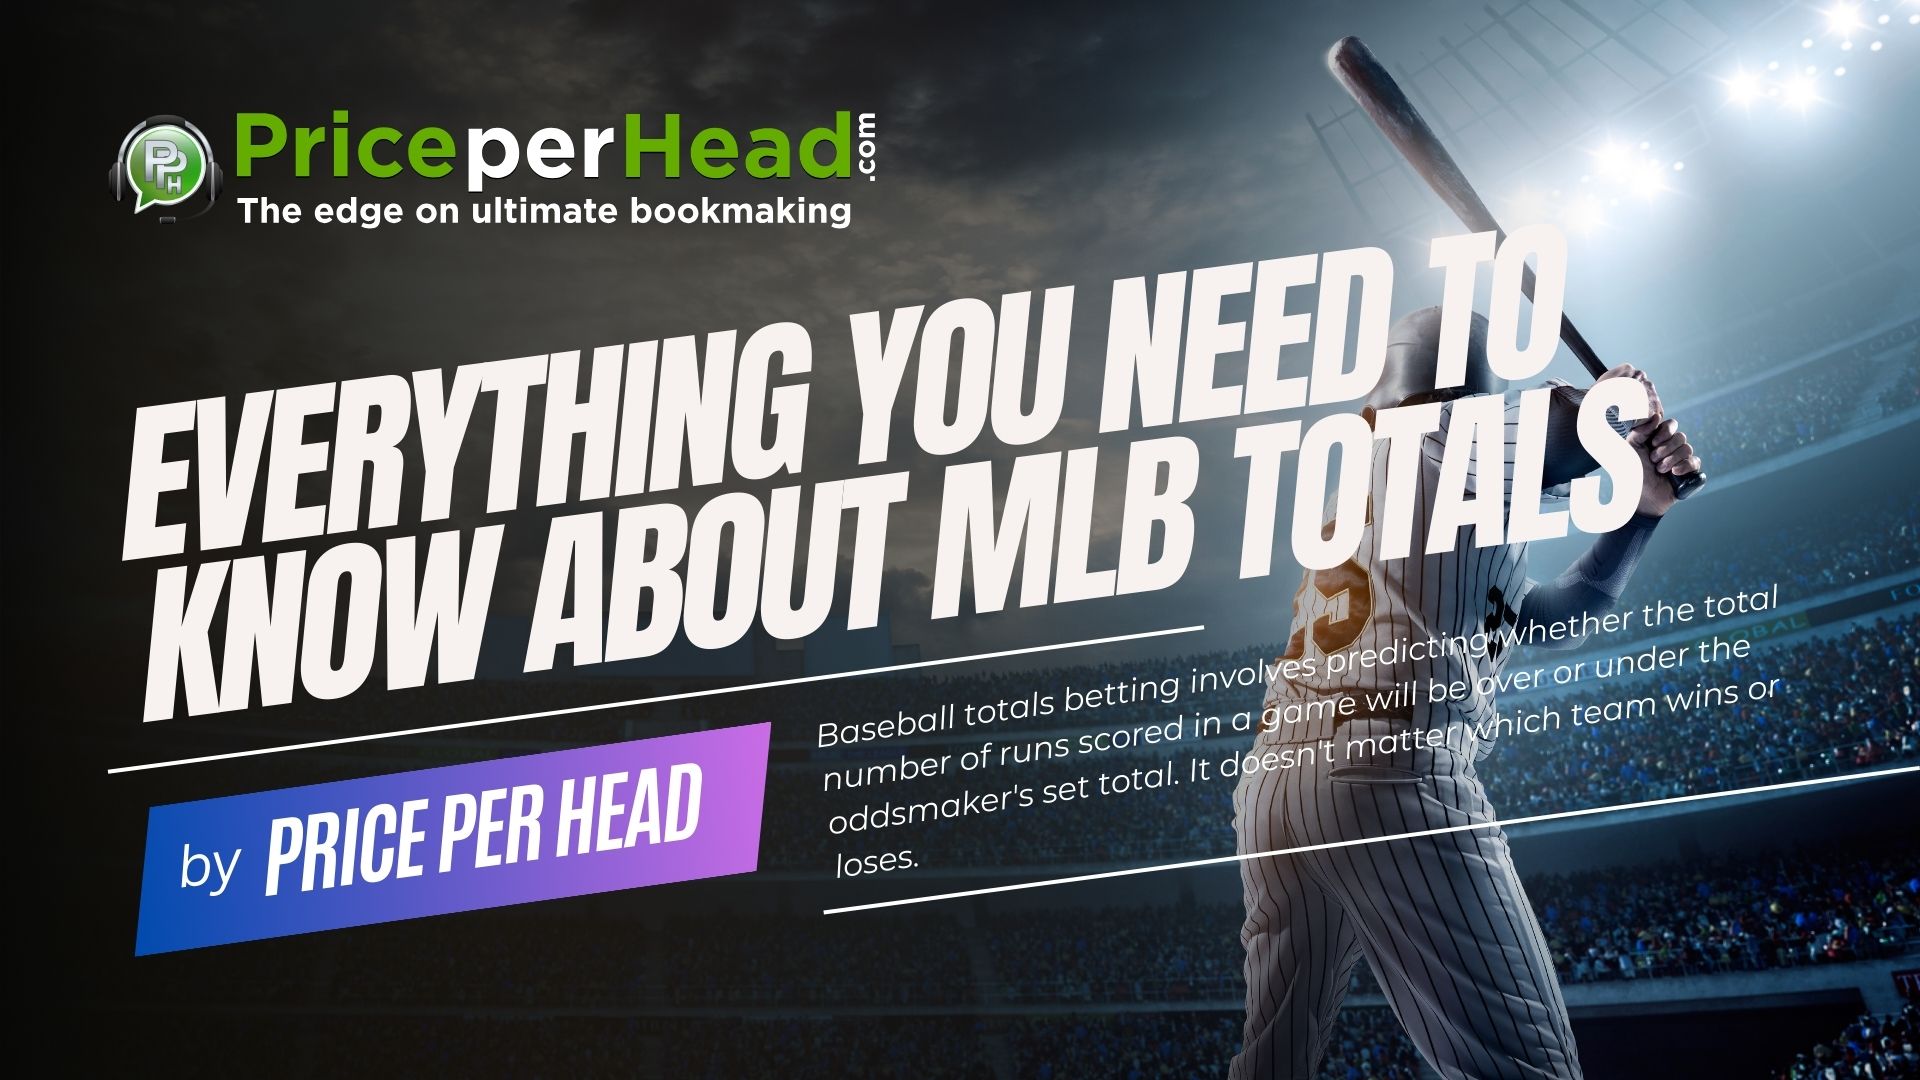 everything you need to know about mlb totals, pay per head services, price per head